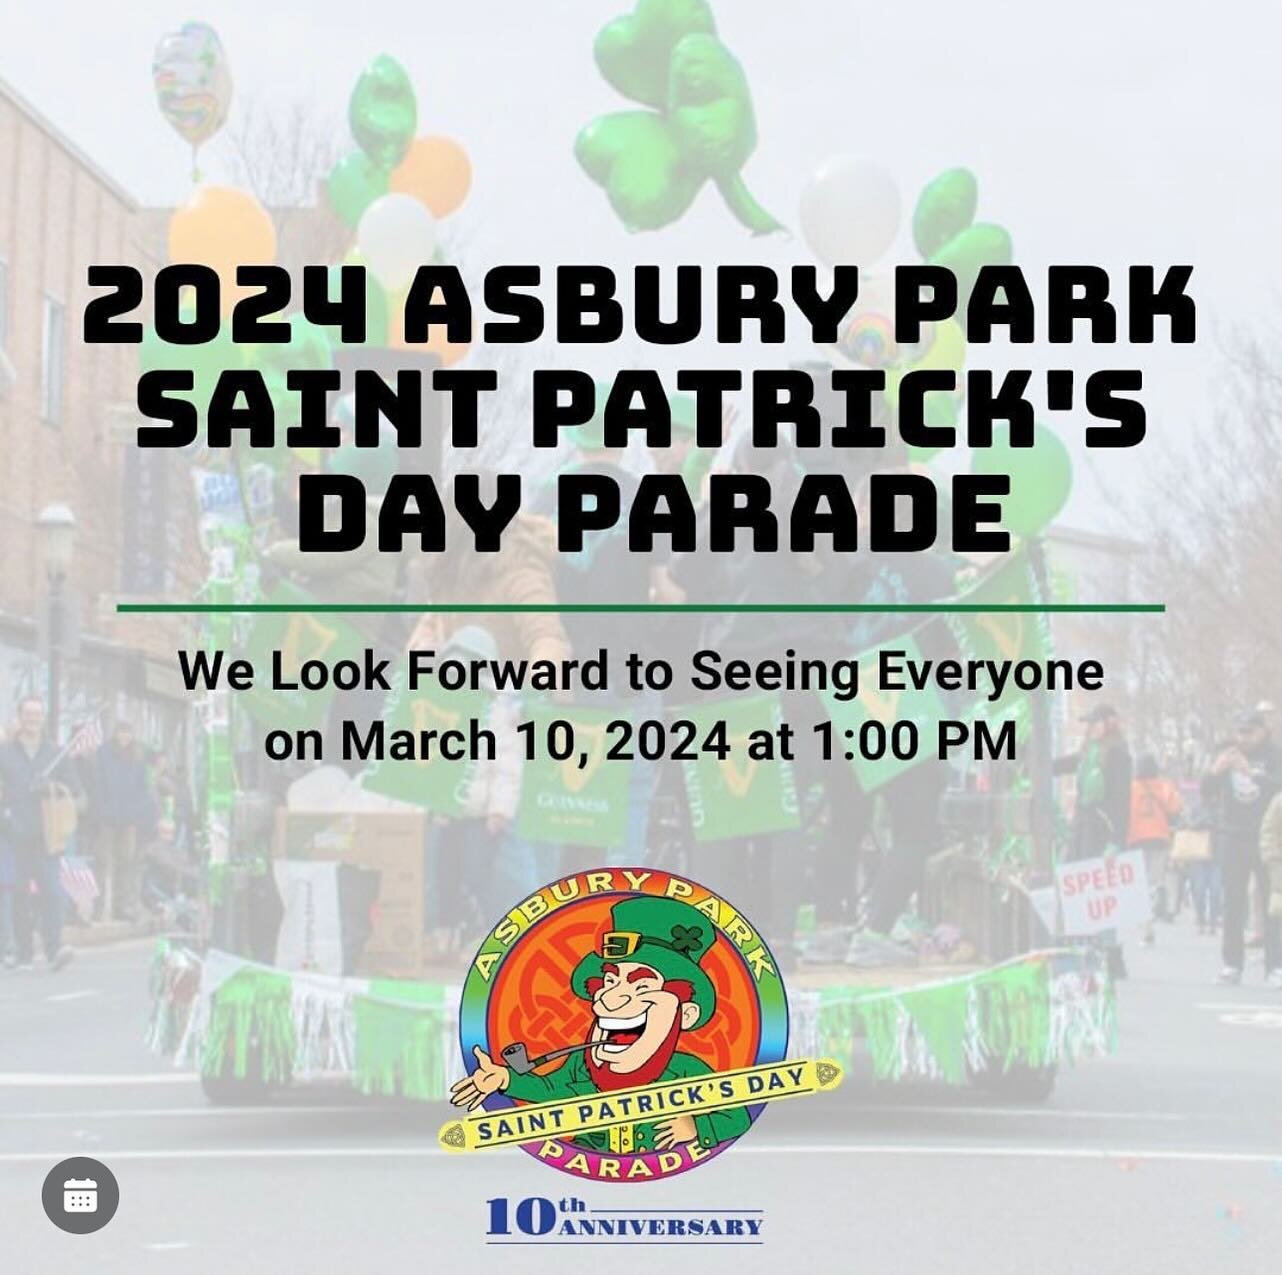 A little over 4 weeks left till our Asbury park St.Patricks Day parade.  Join us for the two remaining events leading up to our favorite day of the year. ☘️ #stpatricksday #asburypark #asburyparknj #ireland #parade #jameson #green #irish